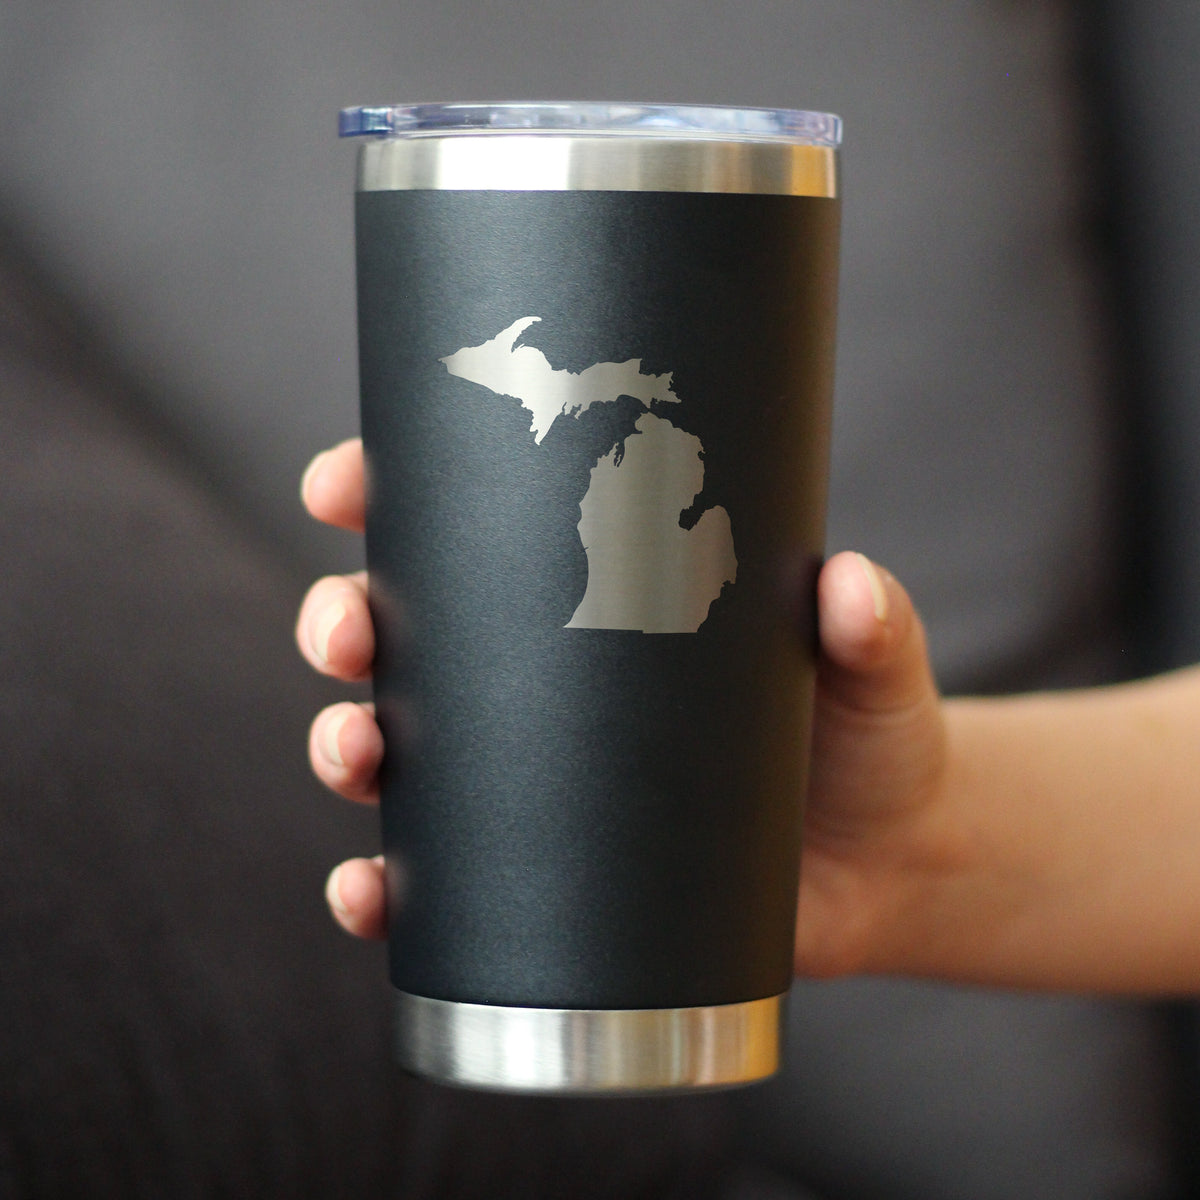 Michigan State Outline - Insulated Coffee Tumbler Cup with Sliding Lid - Stainless Steel Travel Mug - Michigan Gifts and Decor for Women and Men